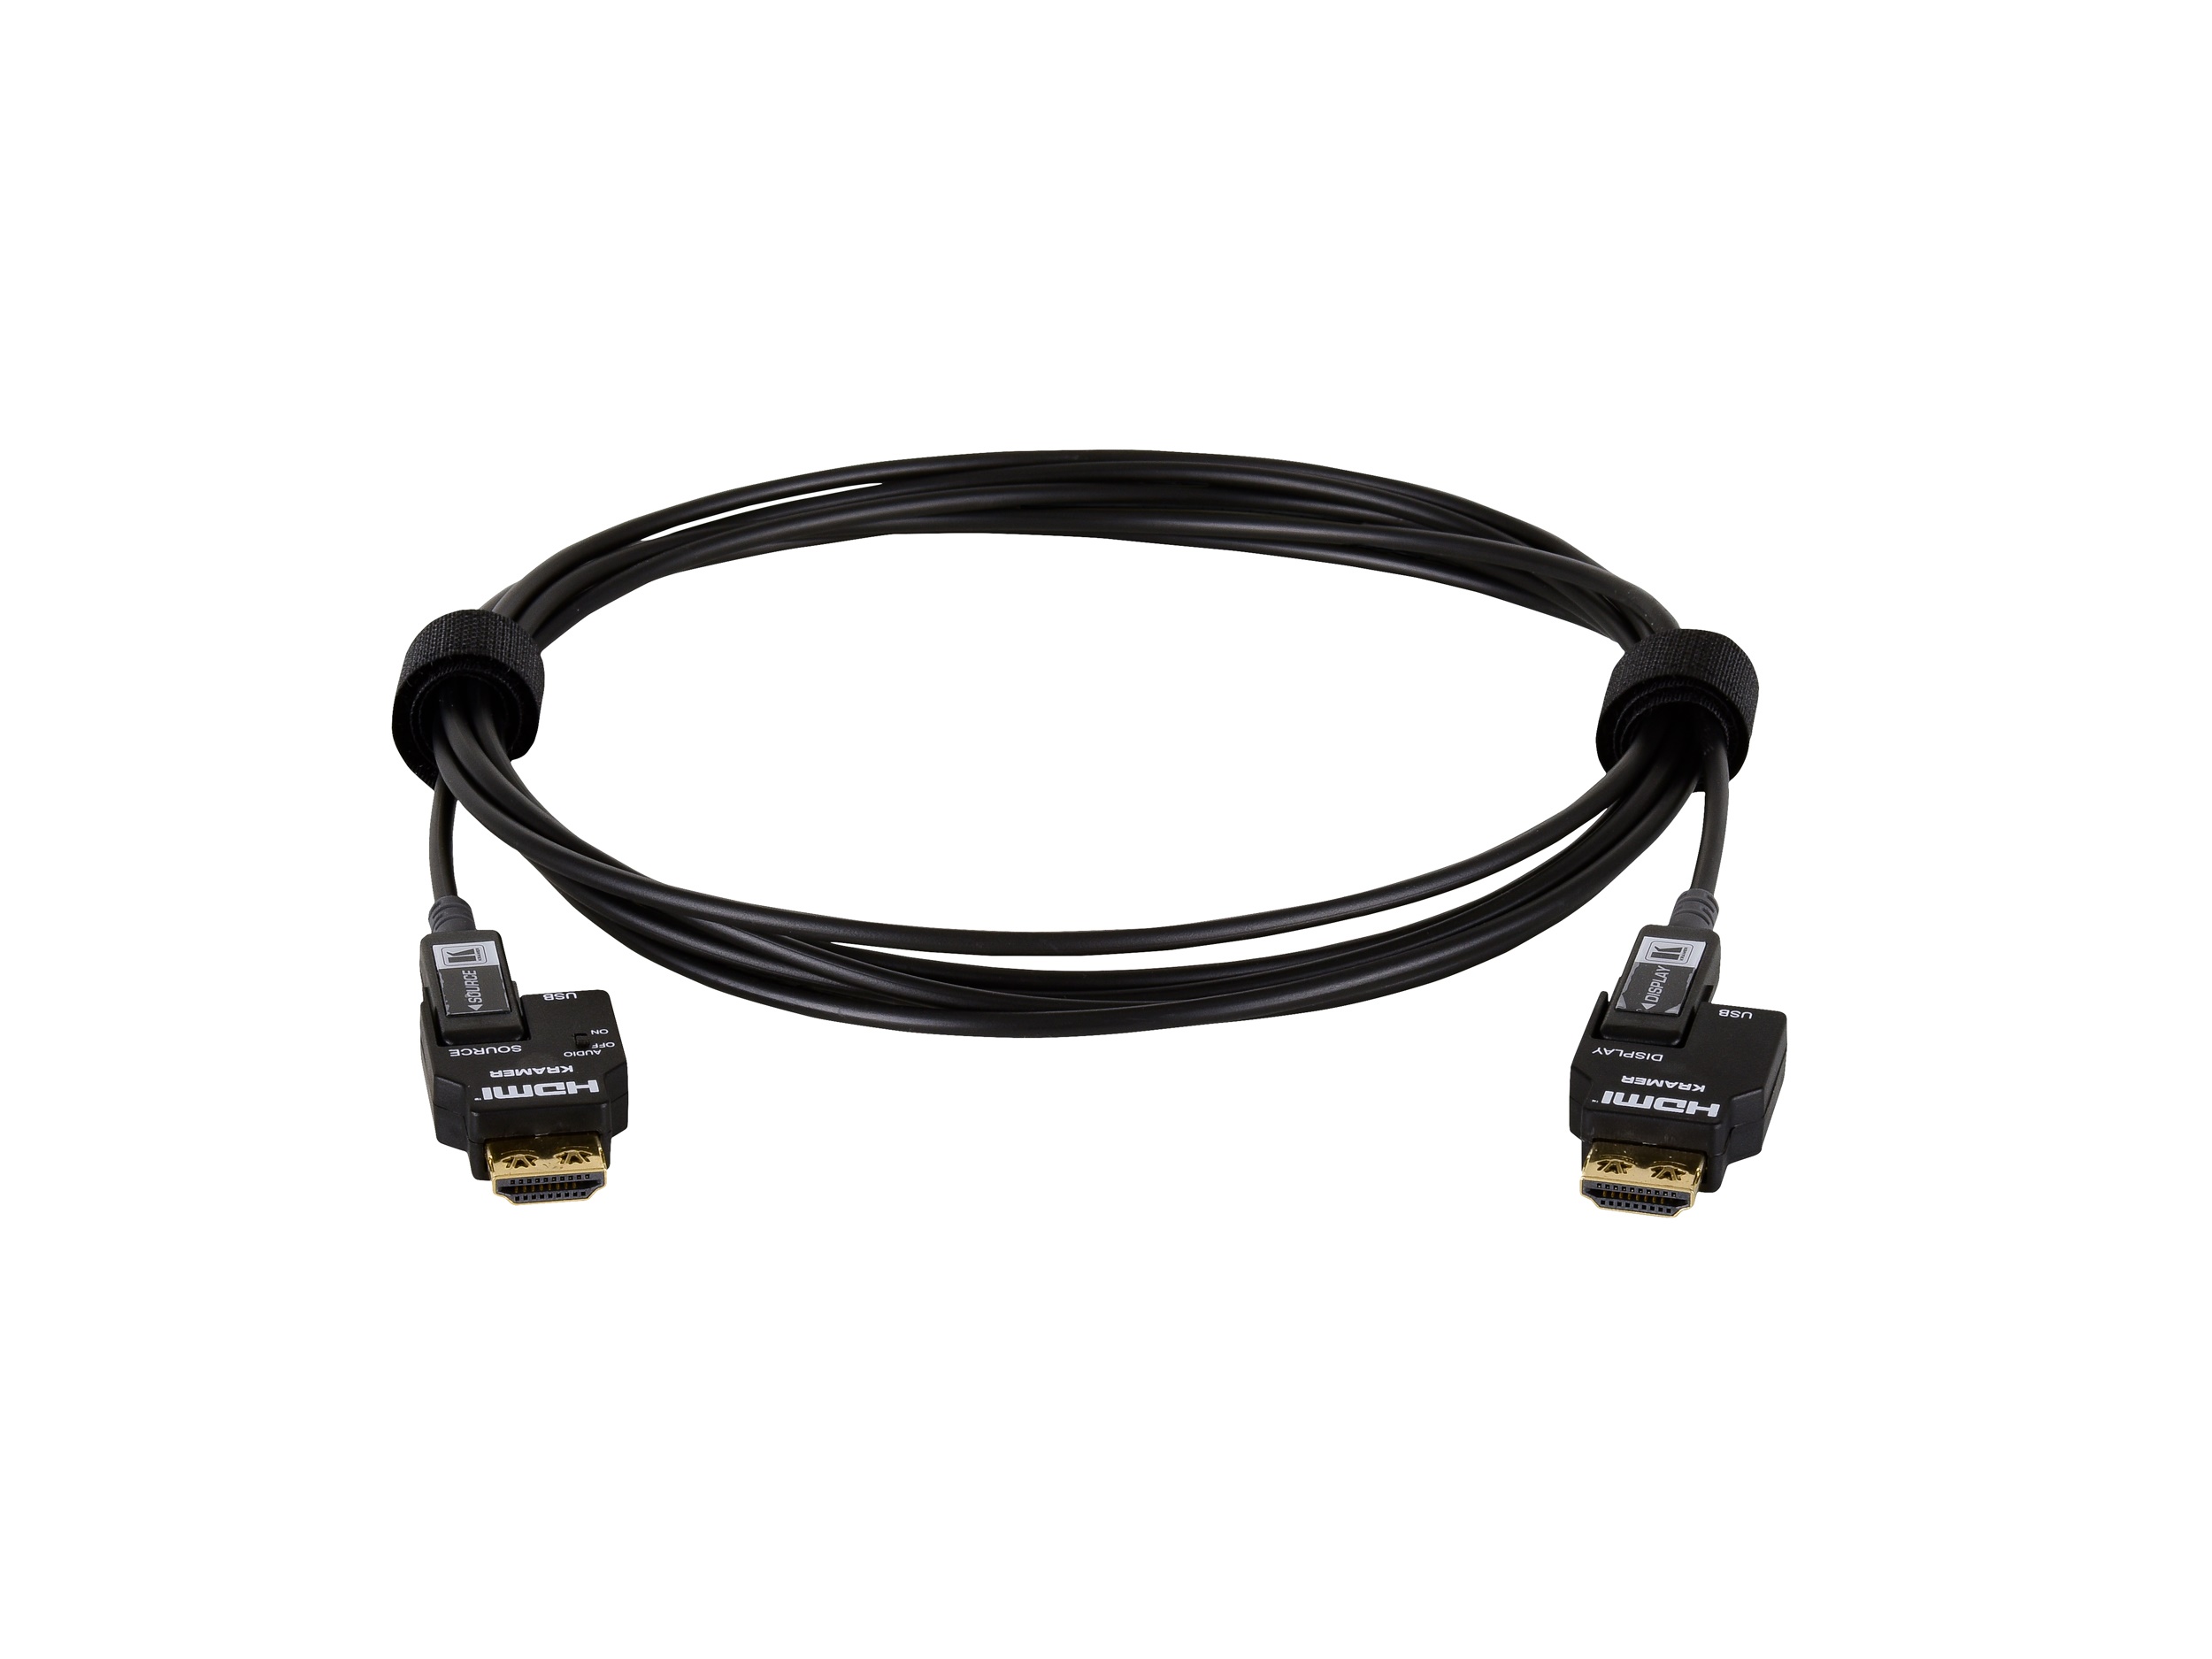 CRS-FIBERH-S1-10 3m/10ft 4K/60Hz (4x2x0) Secured Unidirectional 4K Pluggable HDMI Cable over Pure Fiber Cable by Kramer